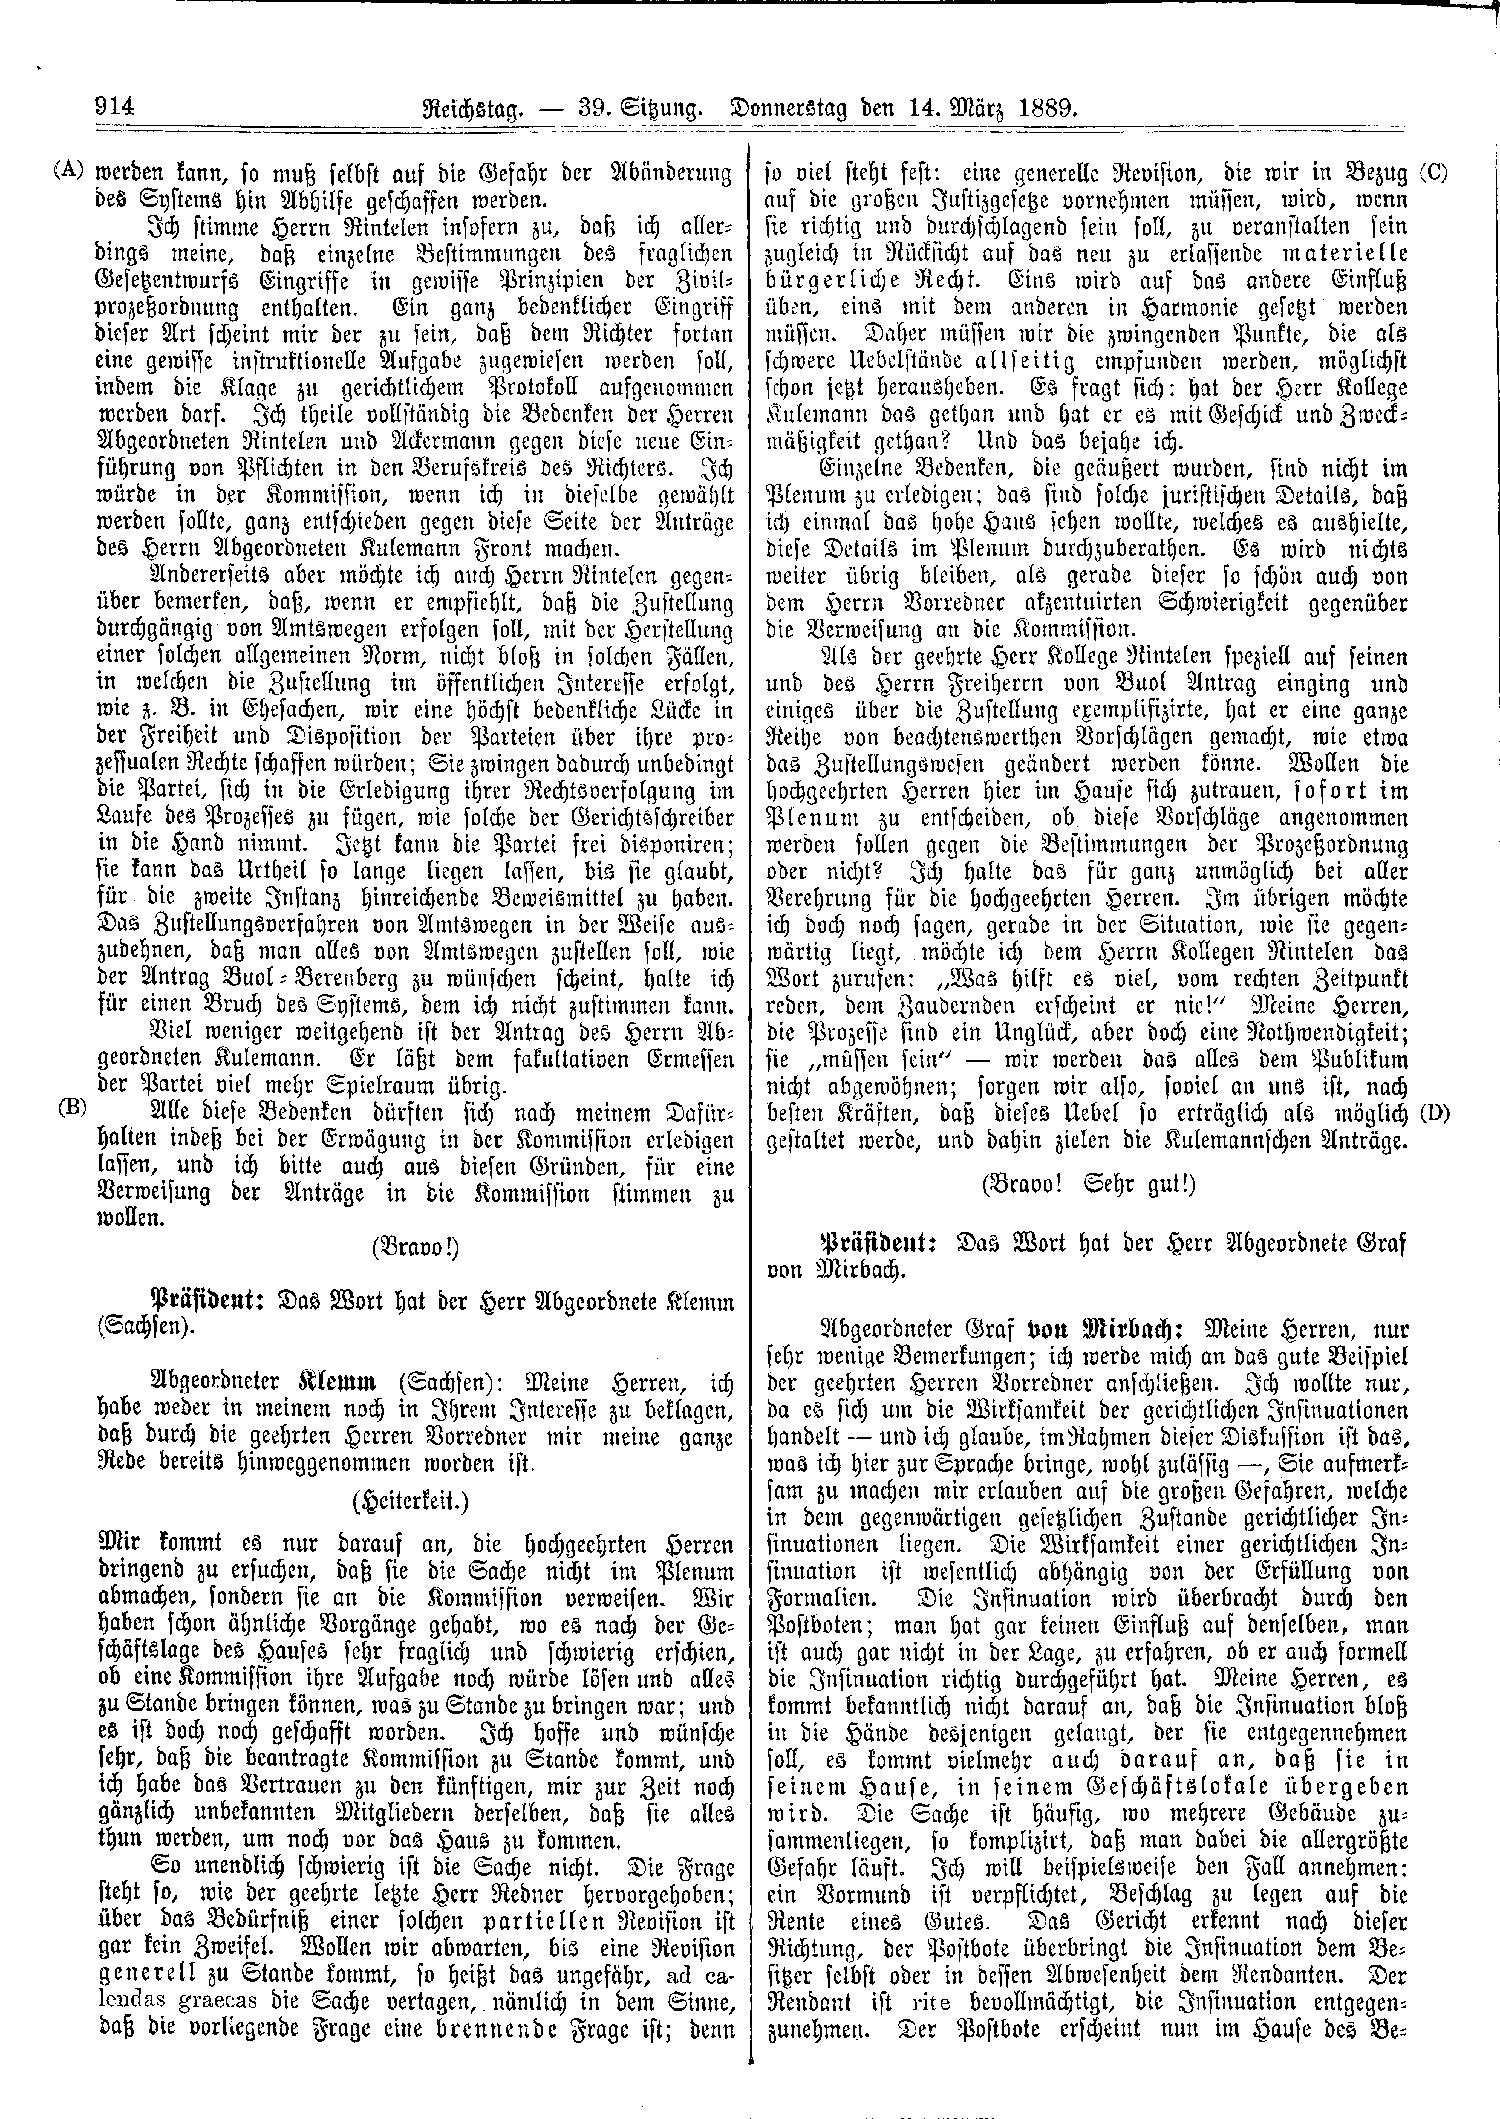 Scan of page 914